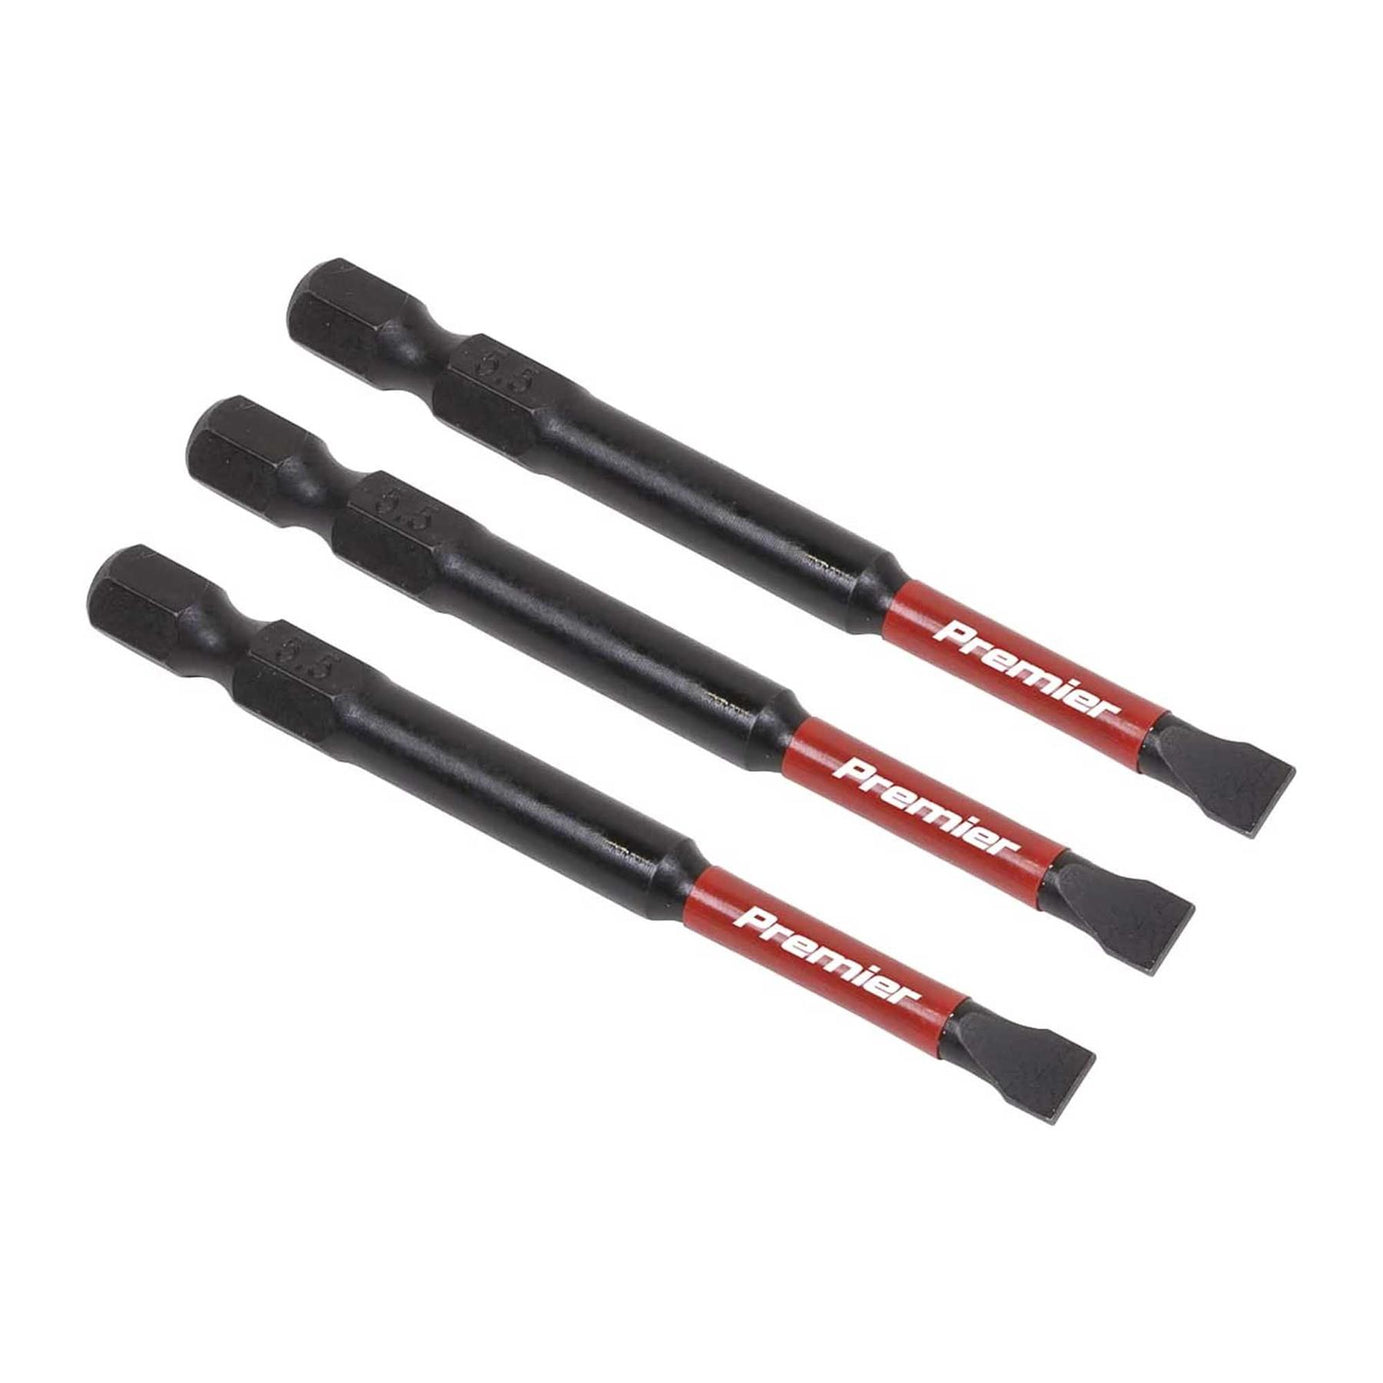 Slotted 5.5mm Impact Power Tool Bits 75mm - 3pc